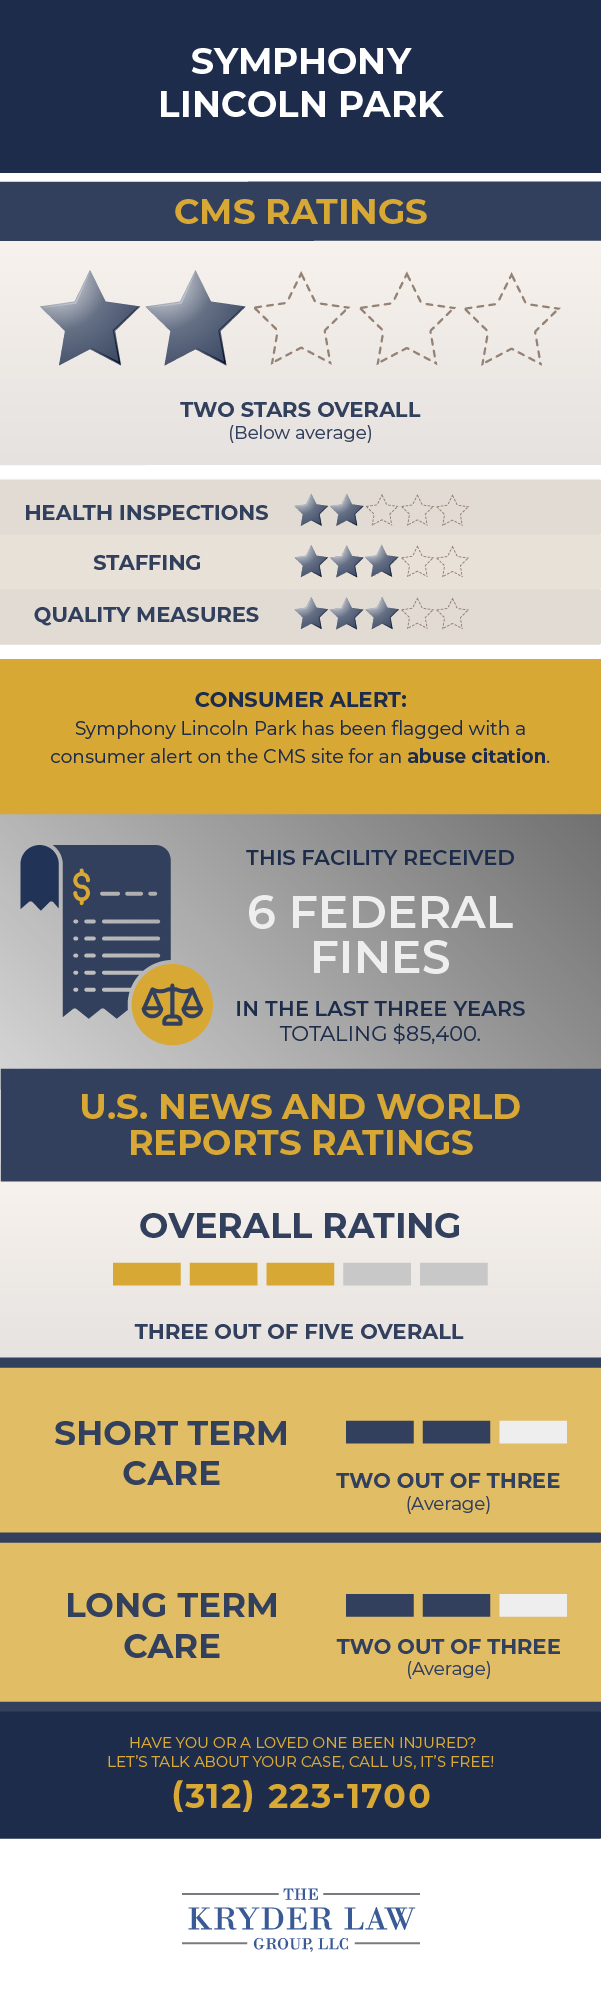 Symphony Lincoln Park CMS Ratings and U.S. News and World Reports Ratings